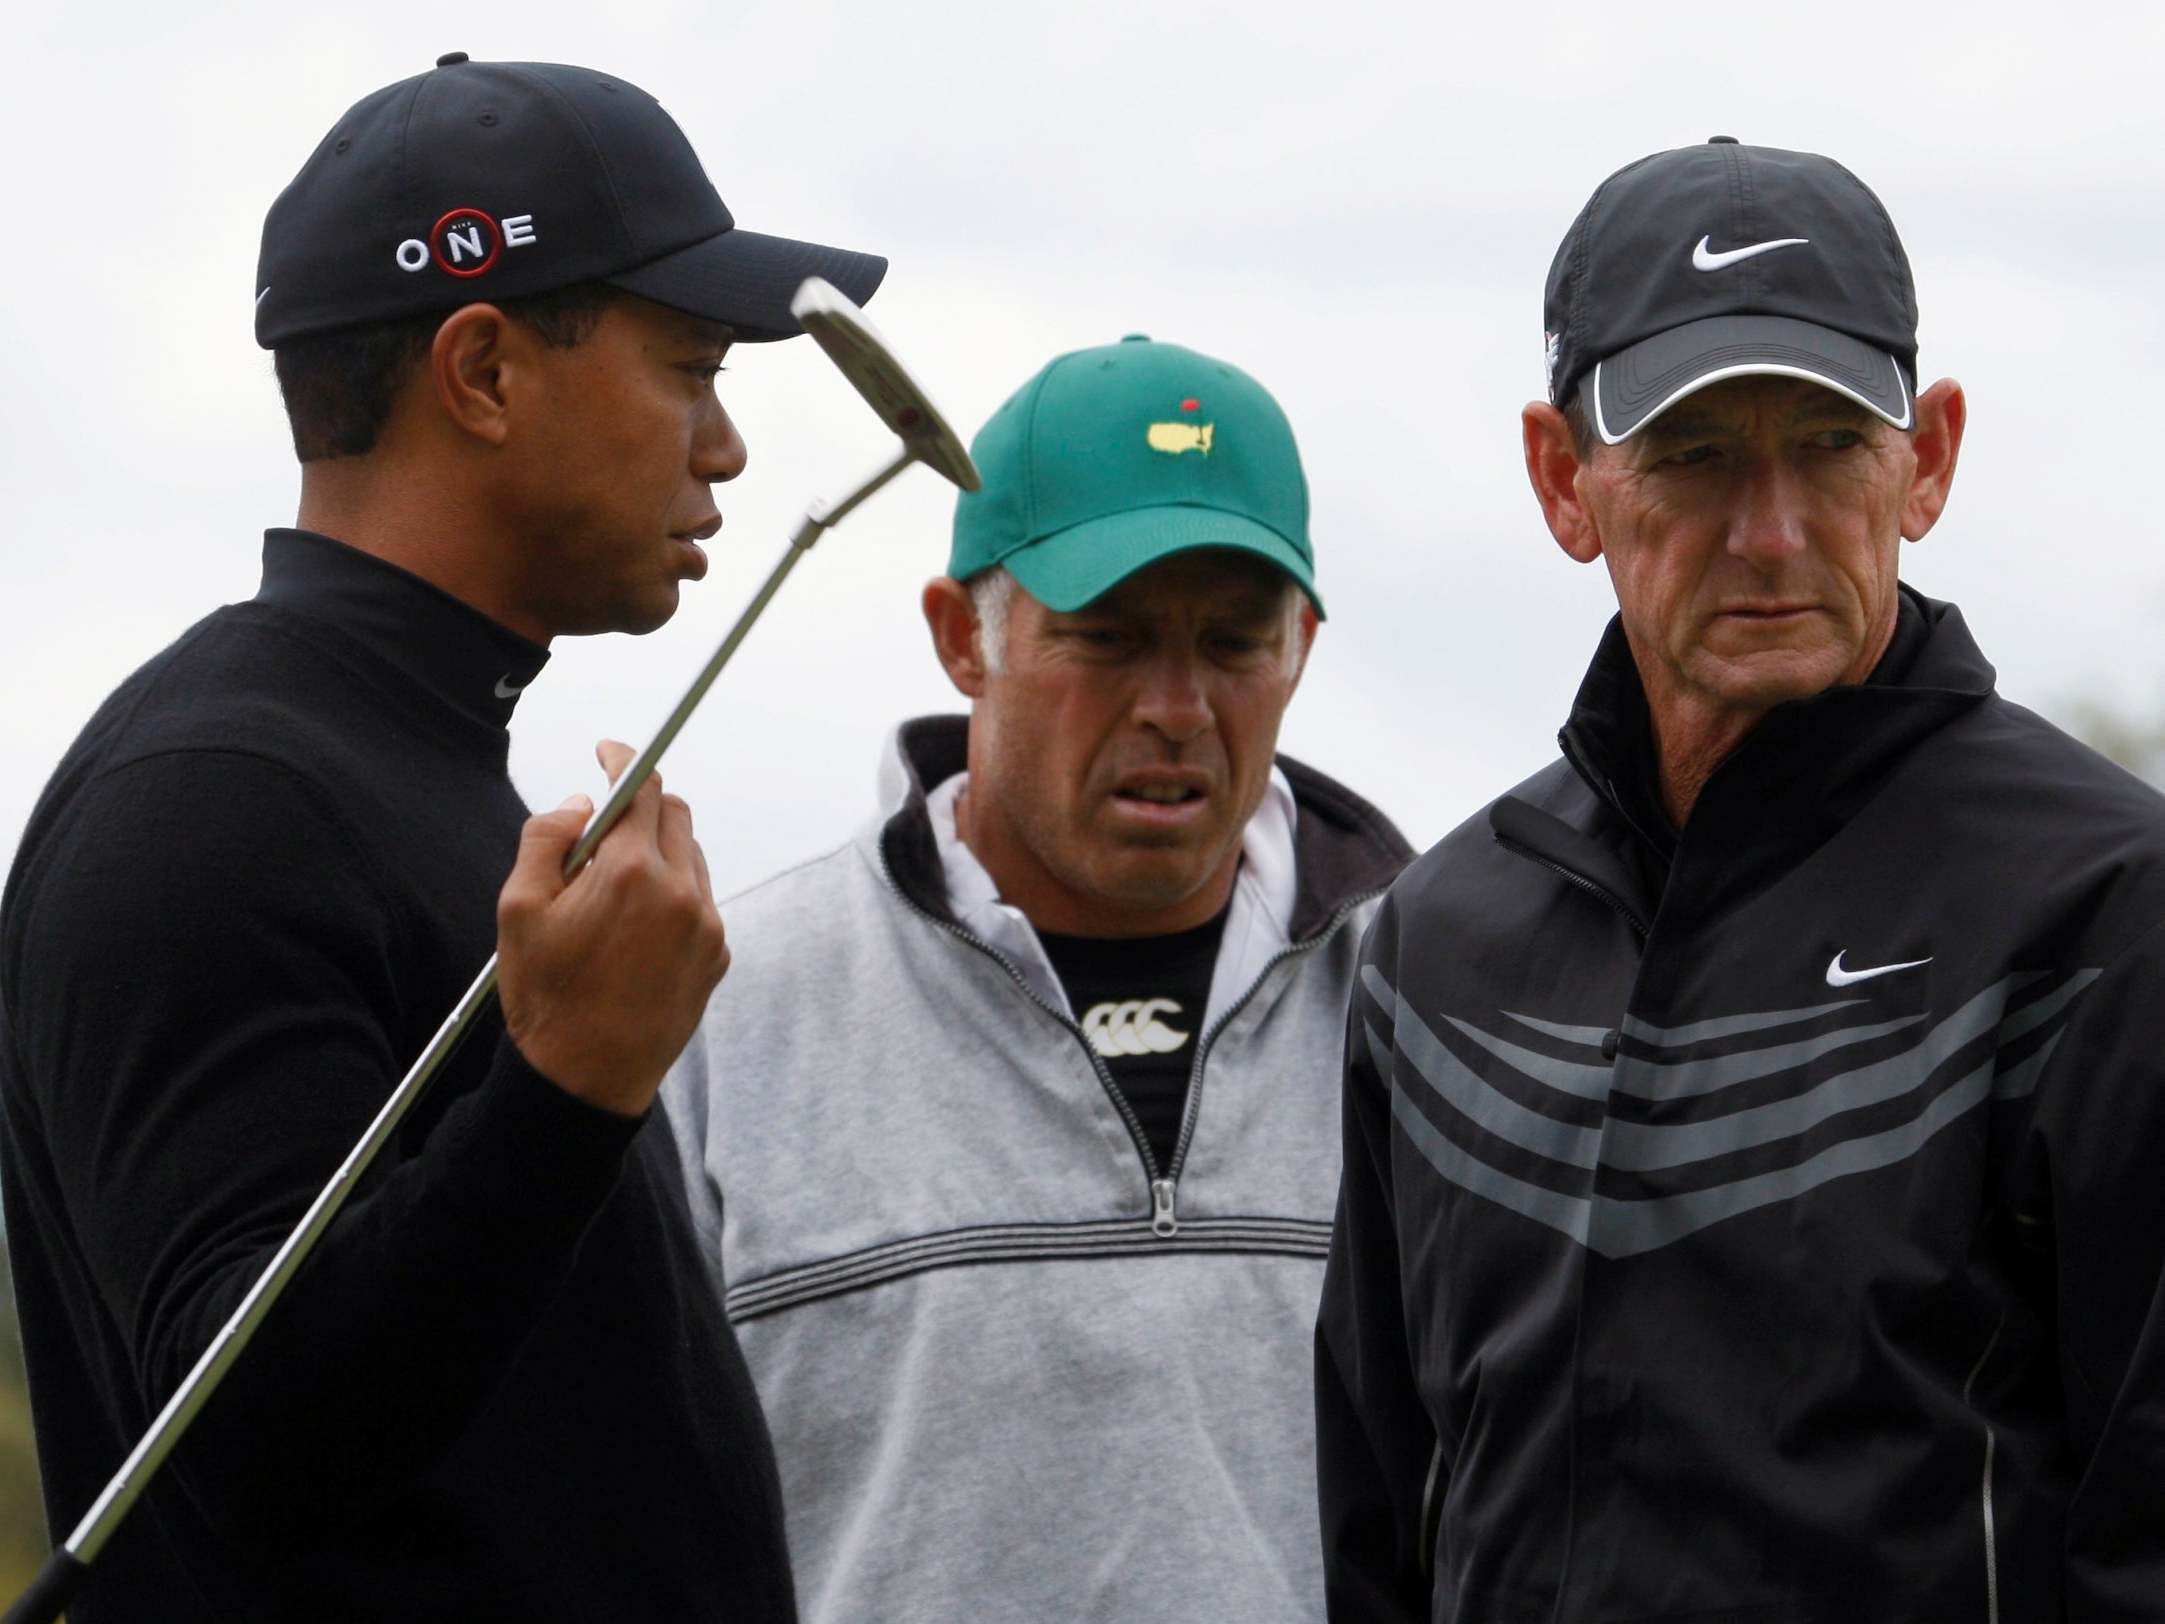 Hank Haney (right) has been suspended from the PGA Tour's radio station for making offensive comments